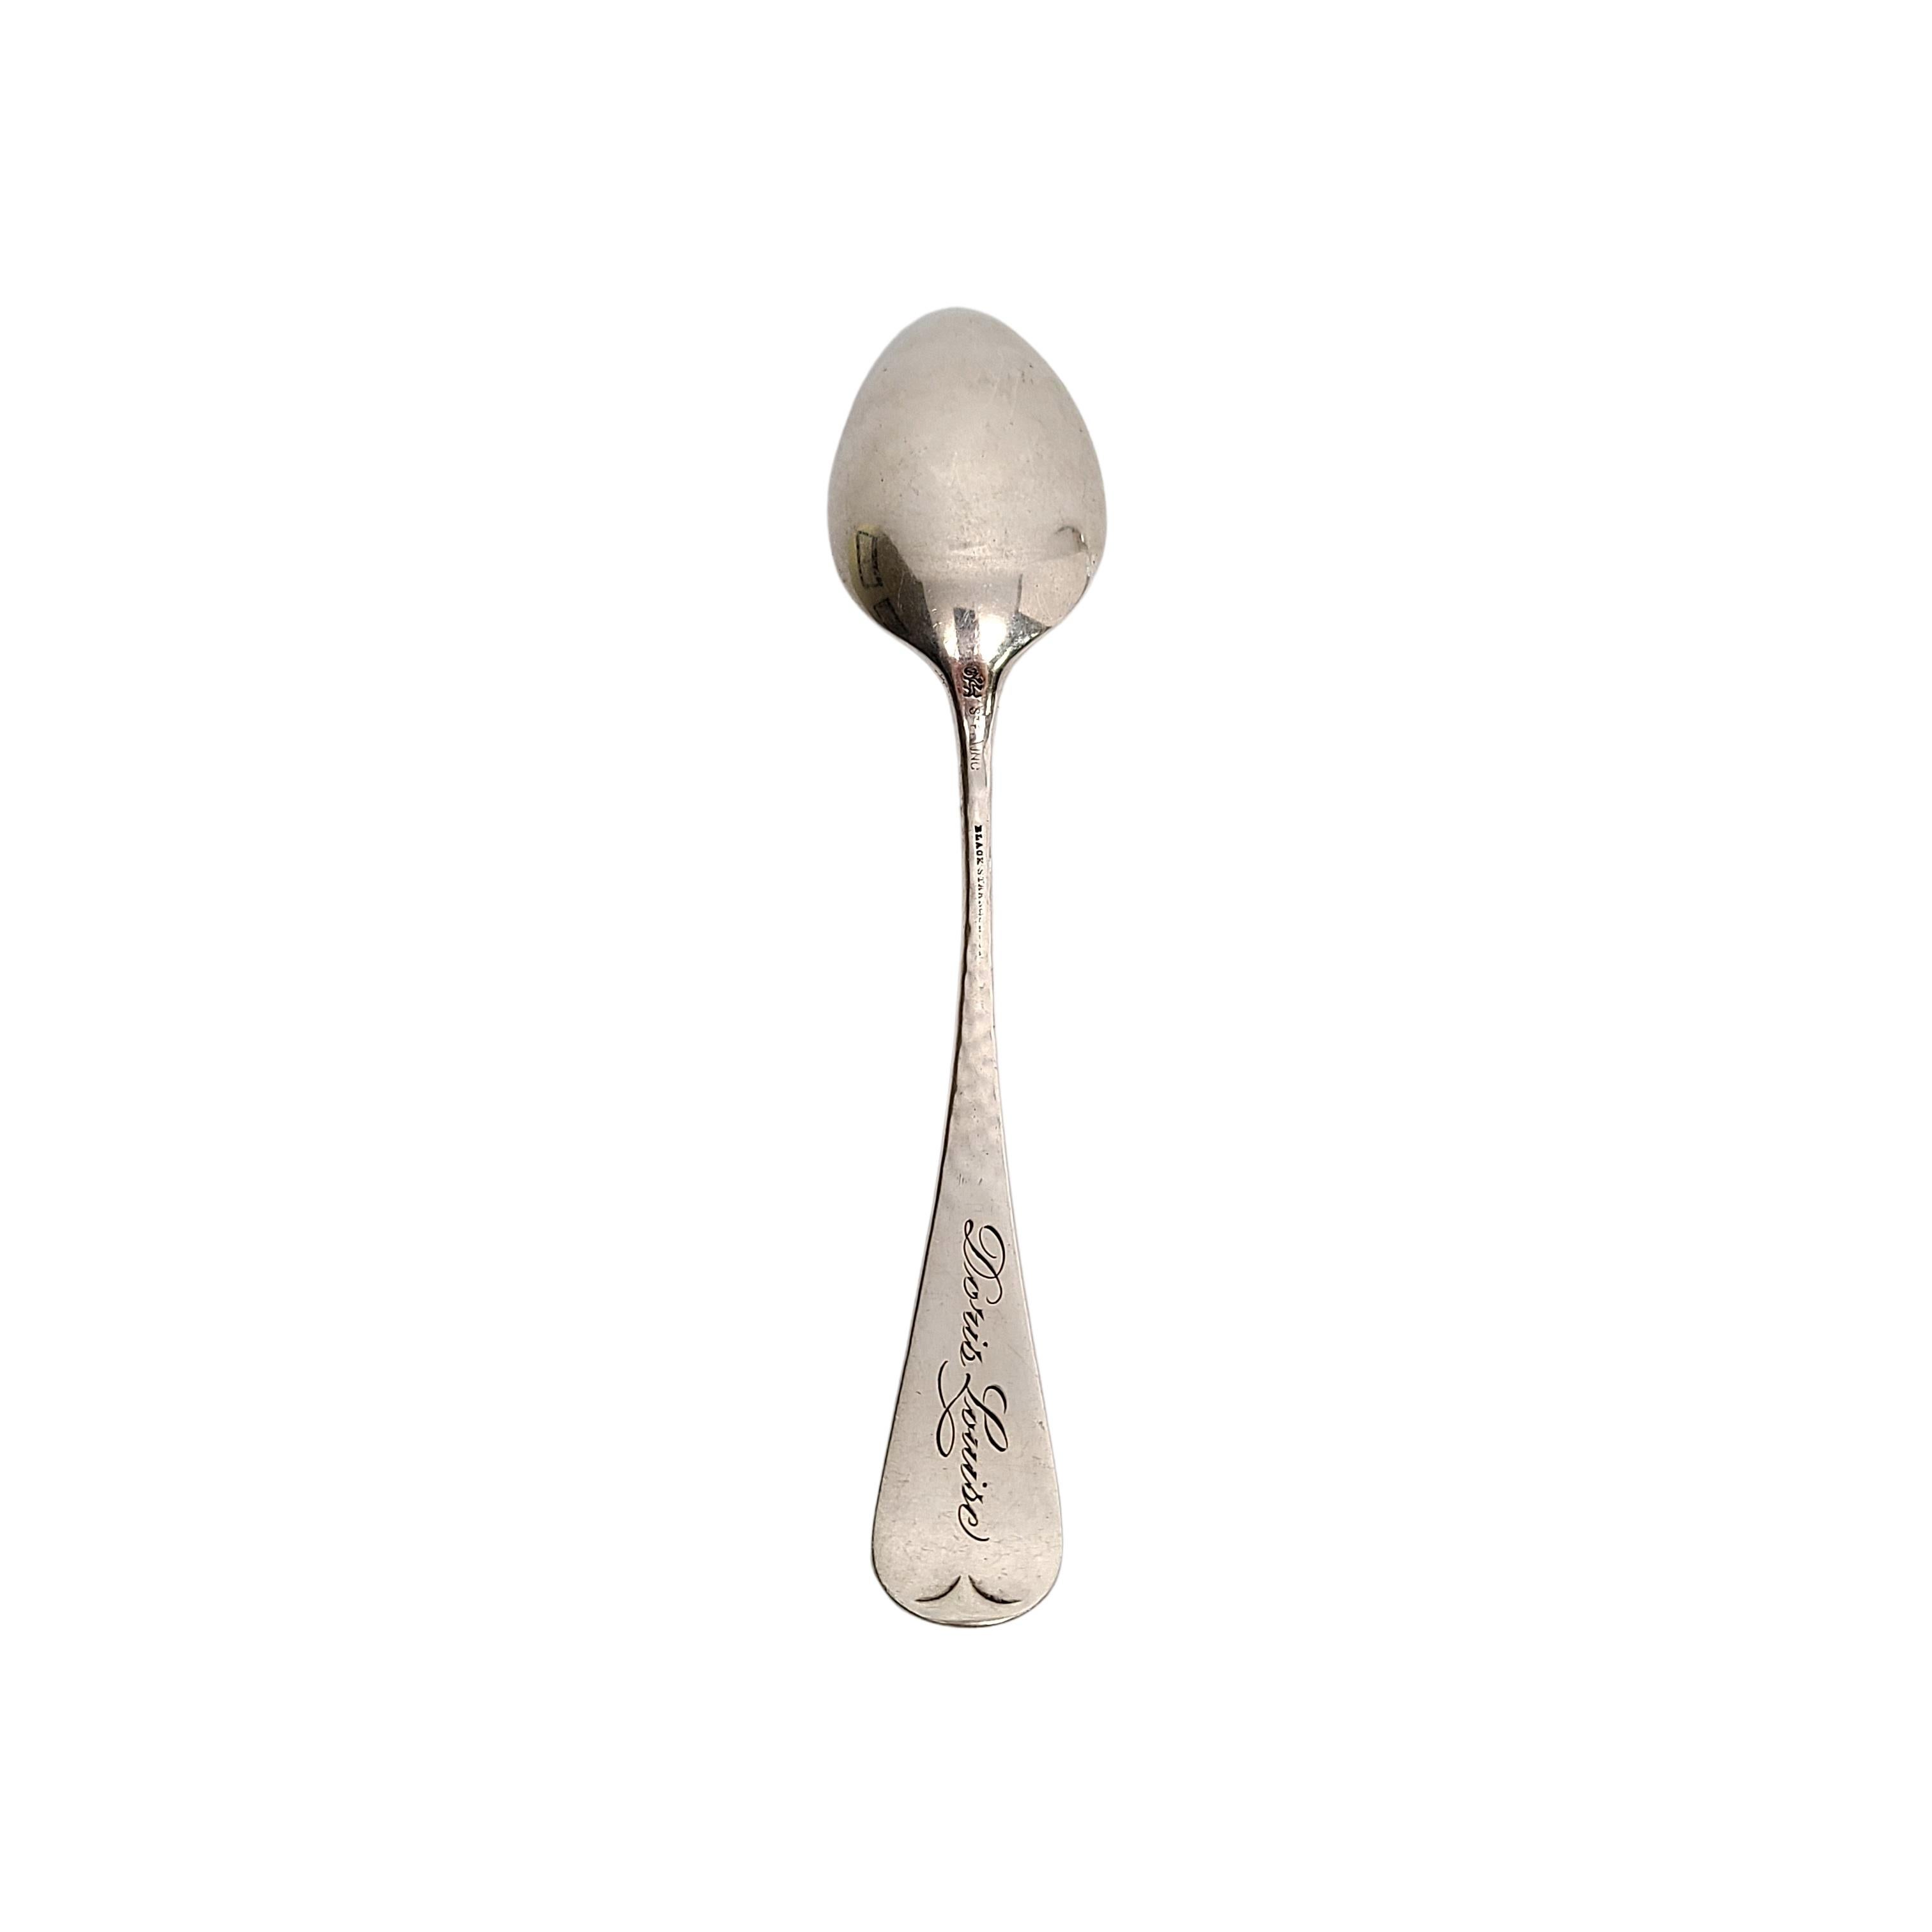 Sterling silver Aesthetic Movement Mixed Metals spoon by Whiting.

Engraving on the top back of the handle: 